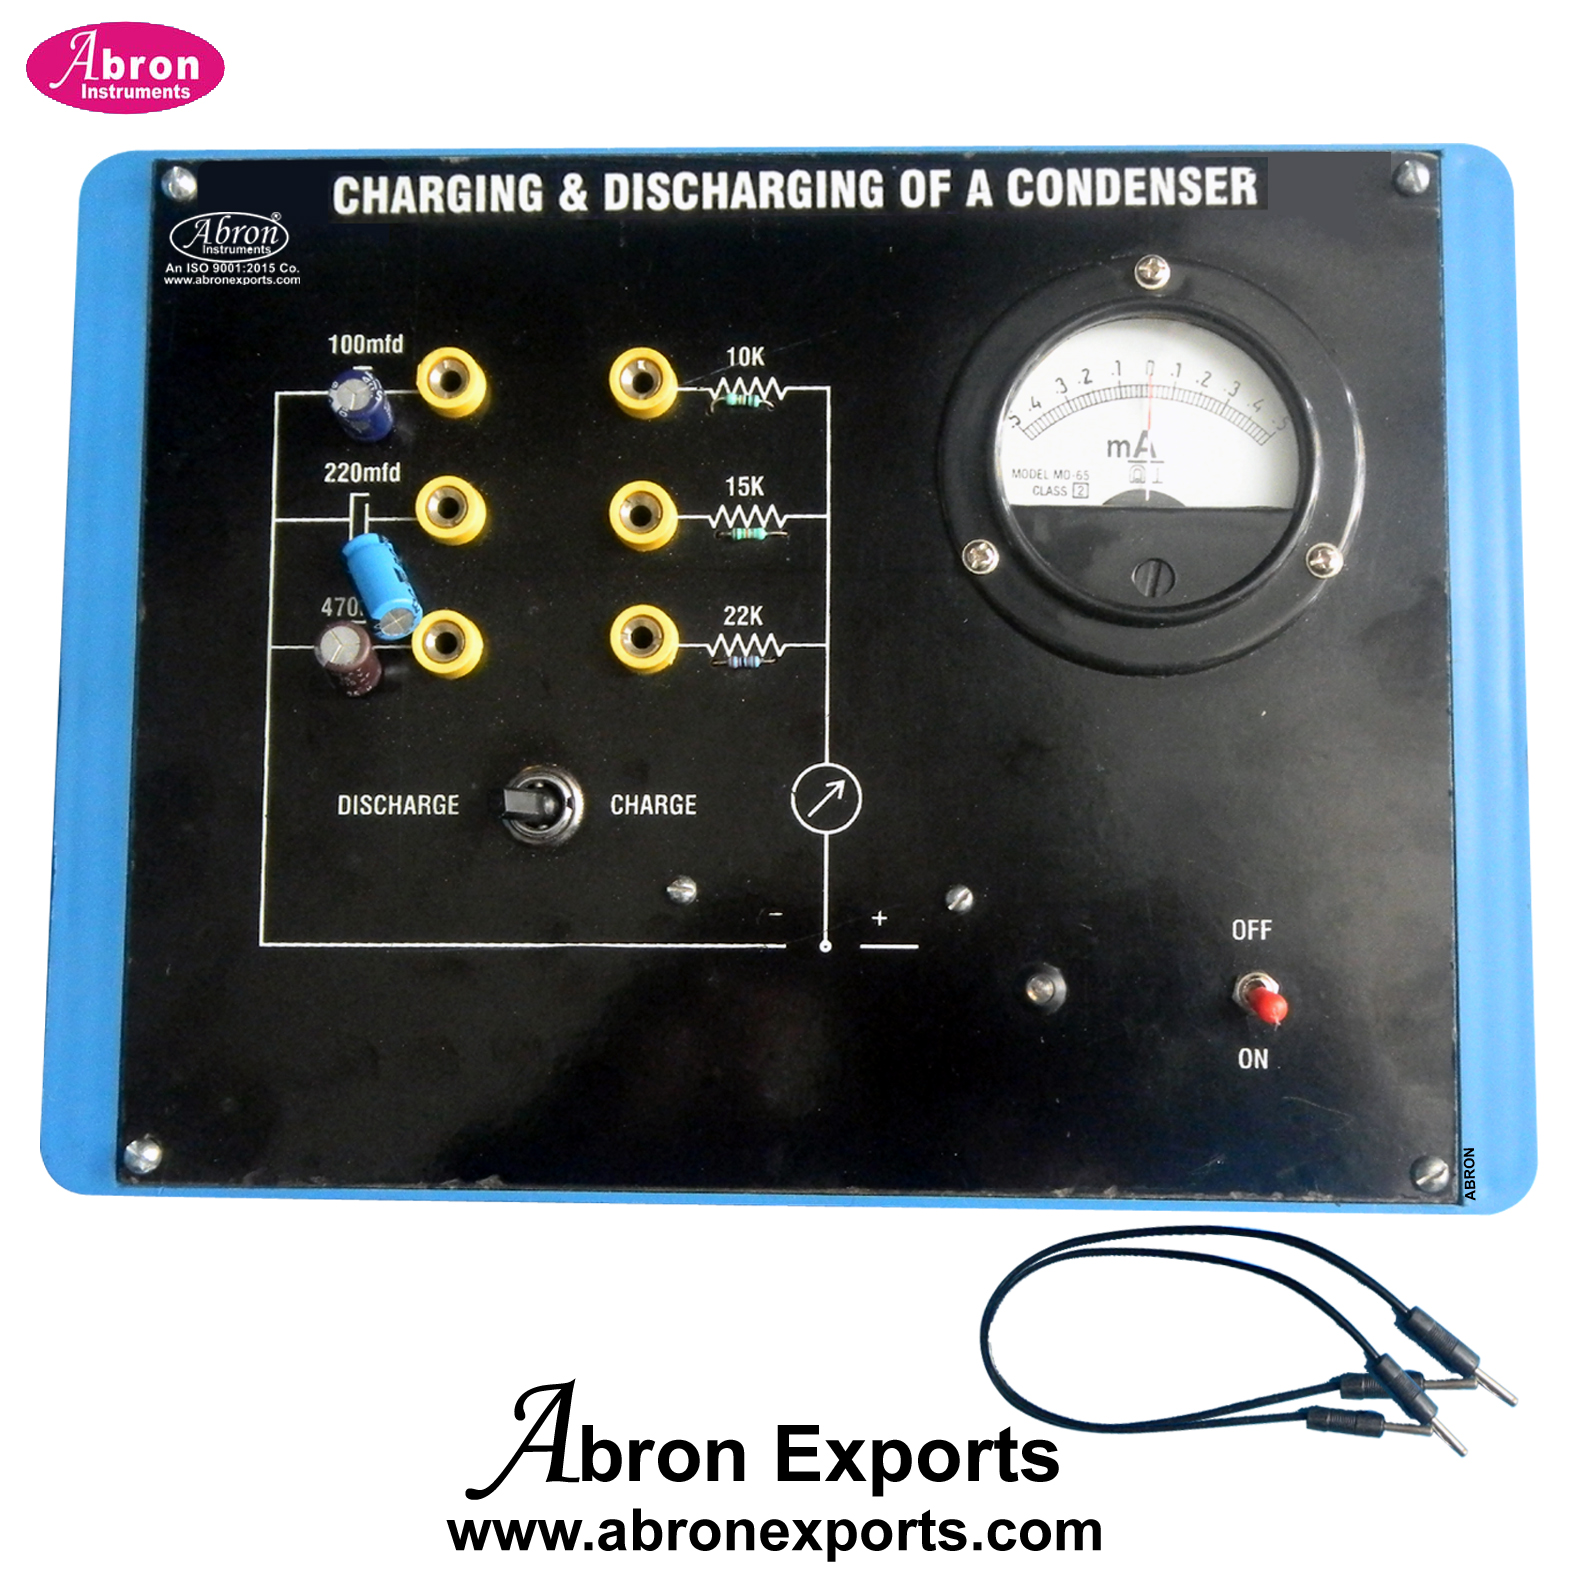 Charging & Discharging of Condenser 1 Dial Meter 3 Electrolytic Condensers 3 resistances power supply With charge discharge key AE-1220A